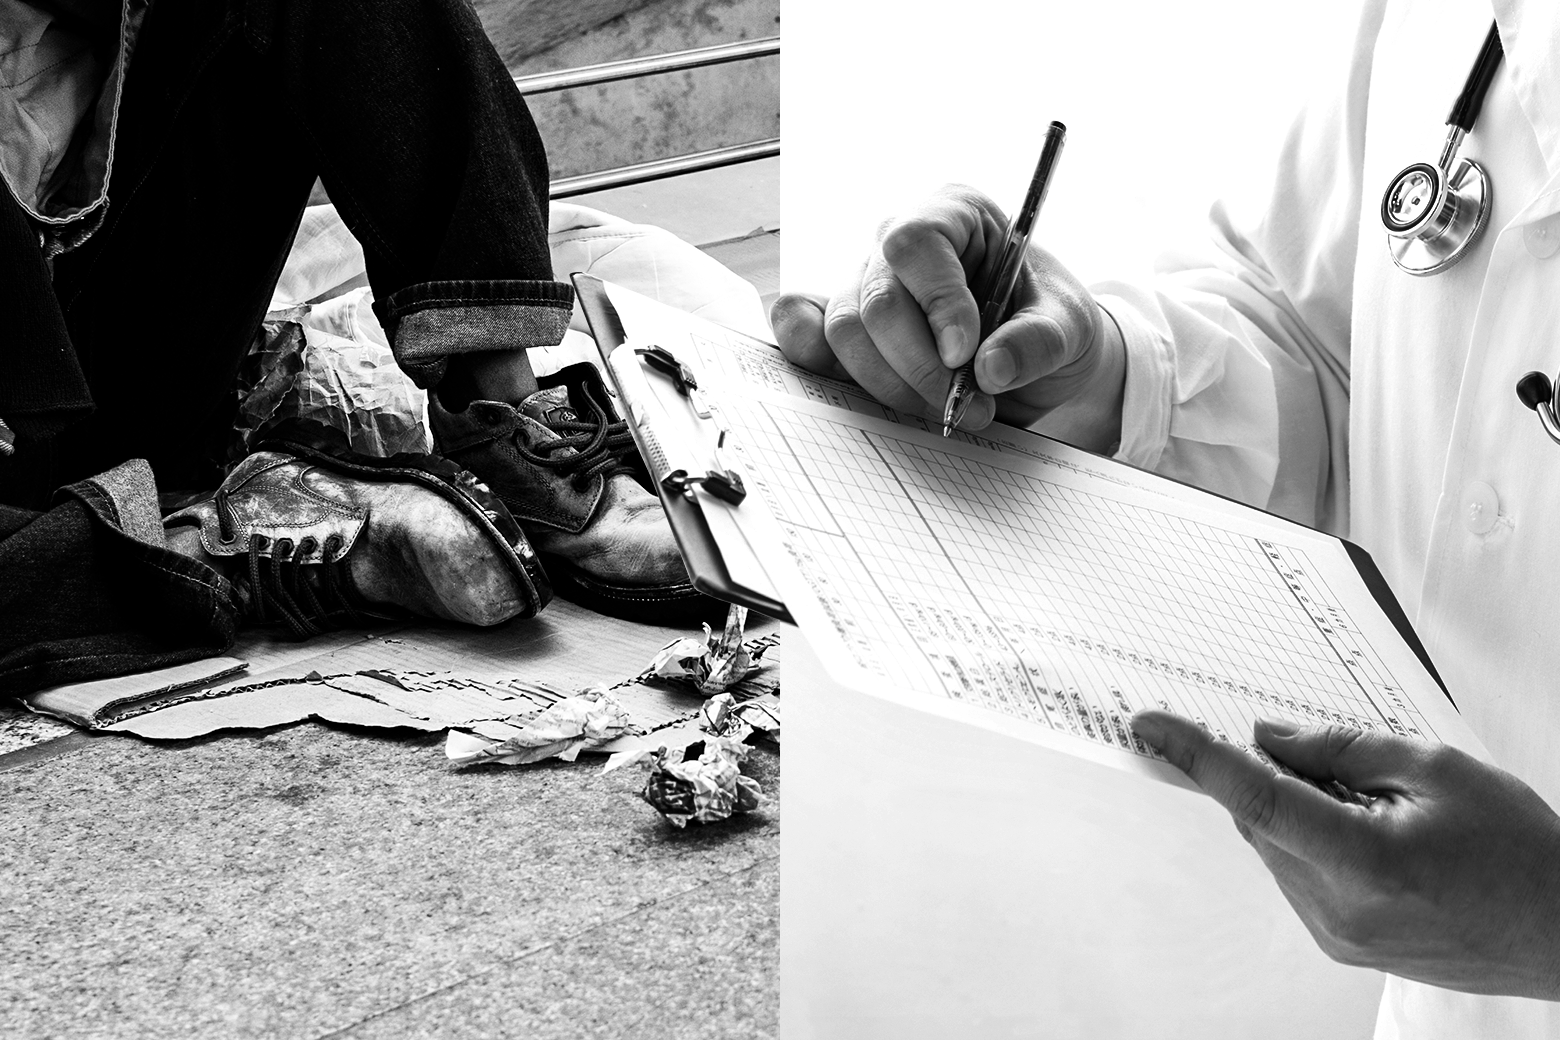 Side-by-side photo illustration of a homeless person sitting on the street and a doctor making a notation on a patient chart.